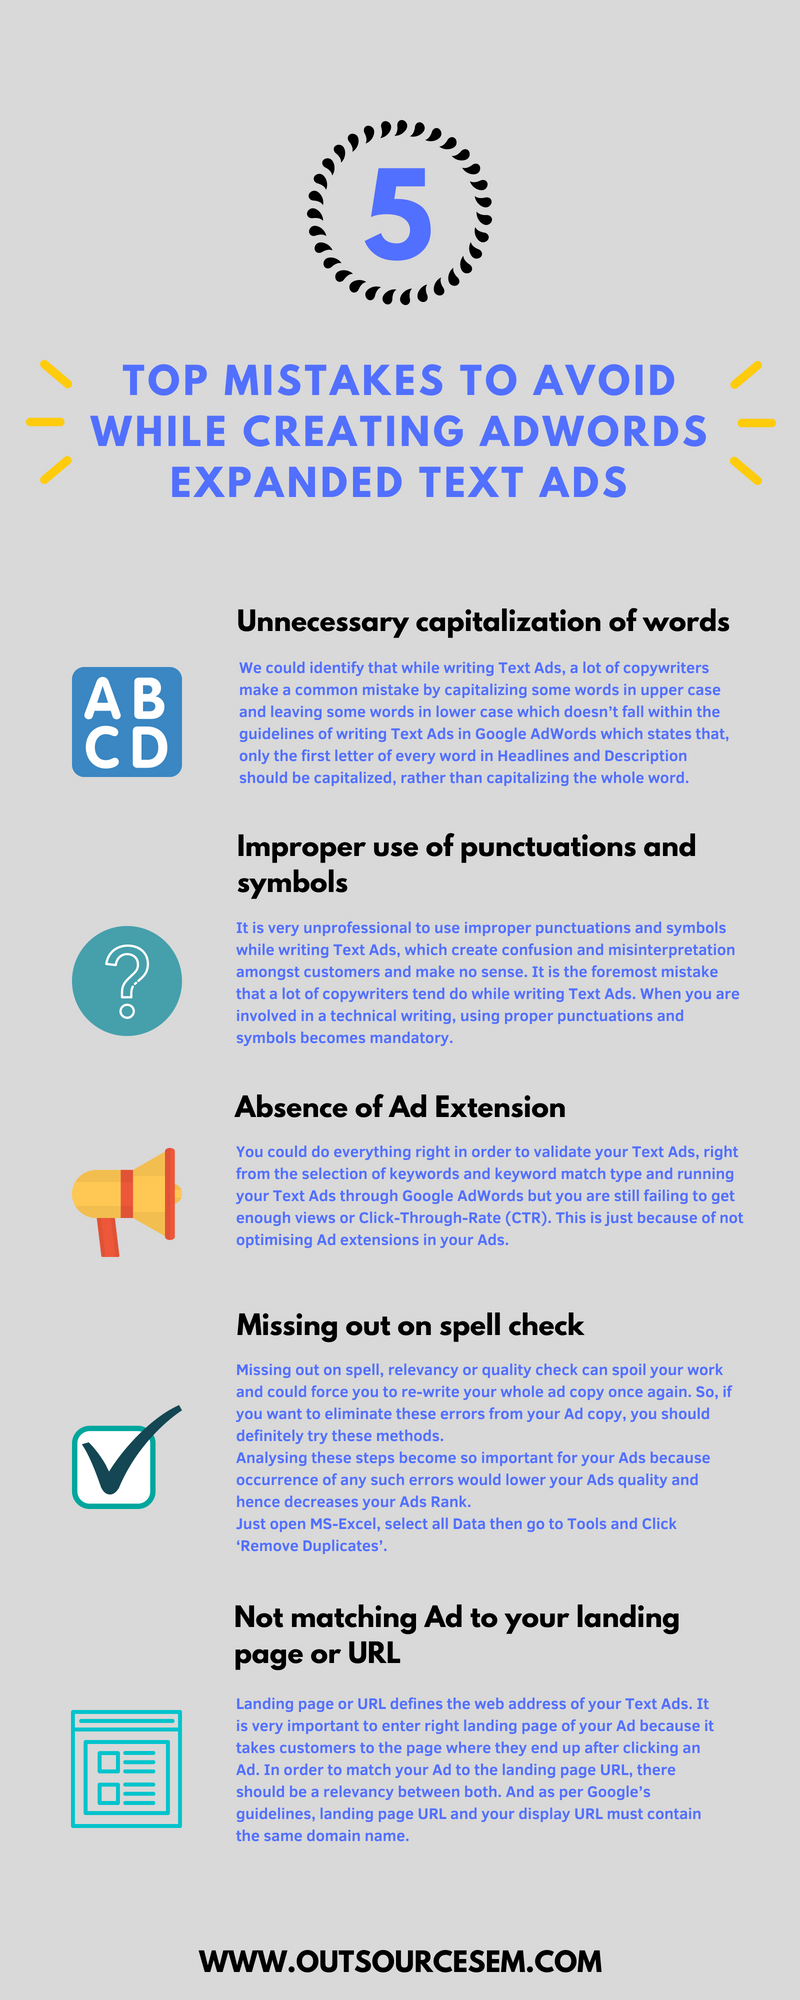 top mistakes to avoid while creating adwords expanded text ads infographic